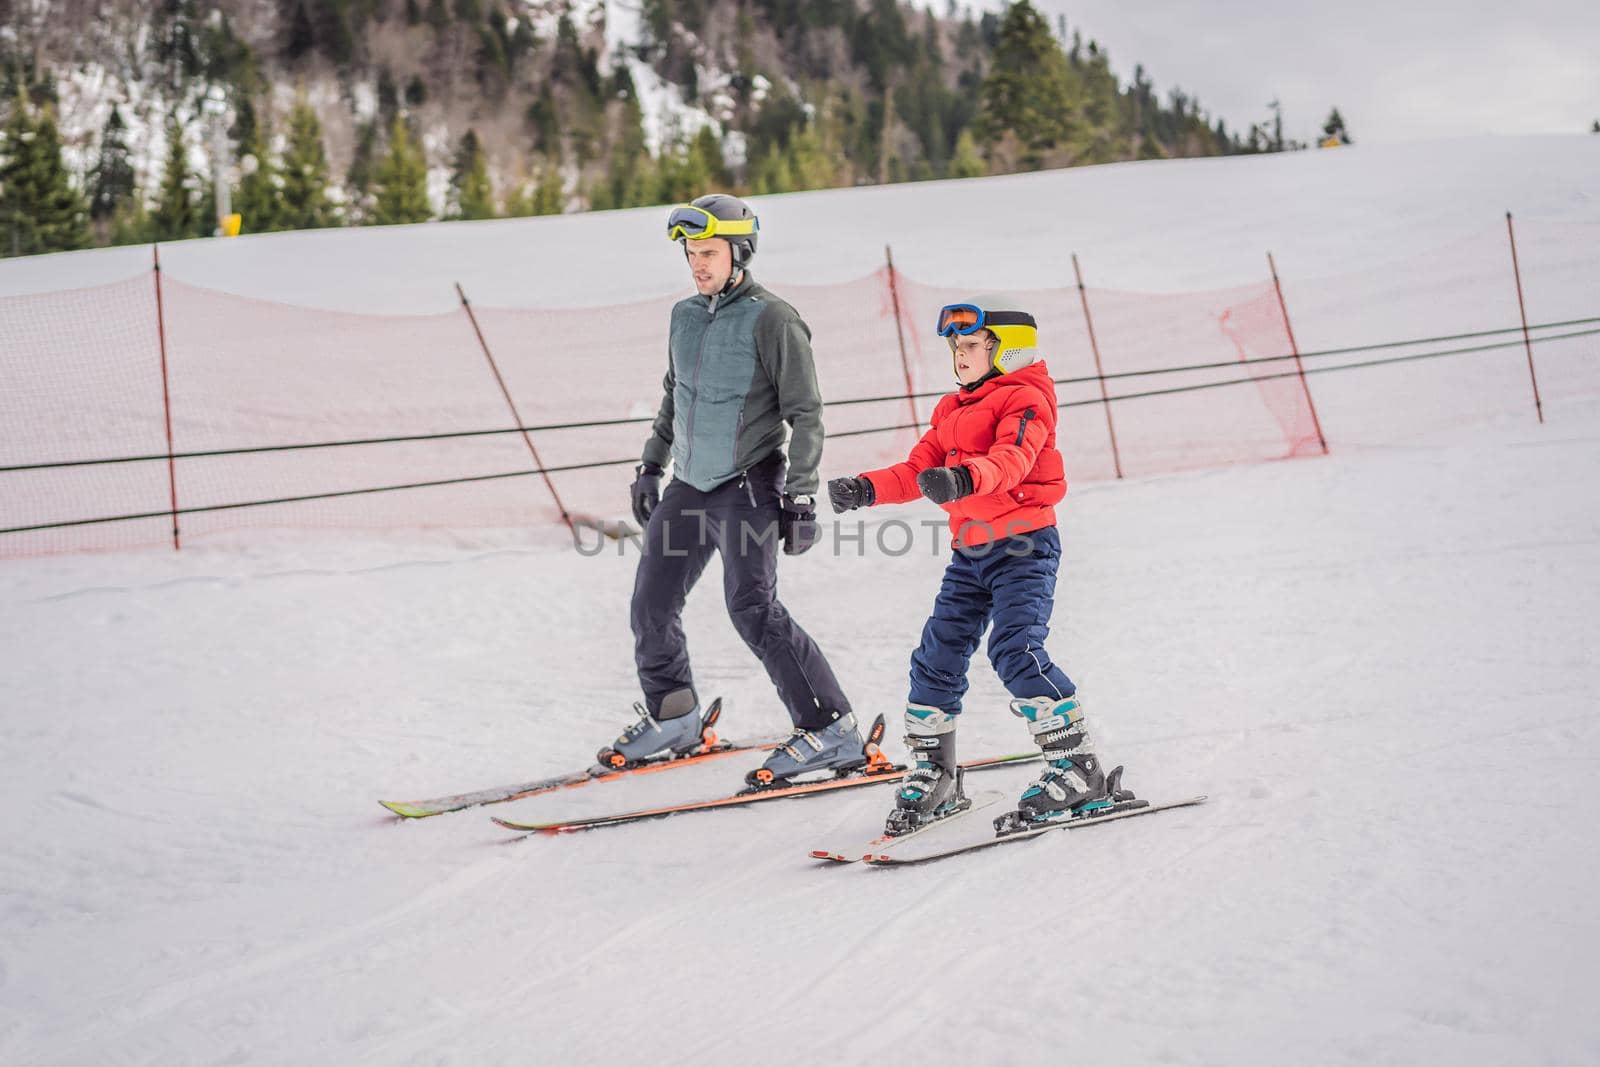 Boy learning to ski, training and listening to his ski instructor on the slope in winter.